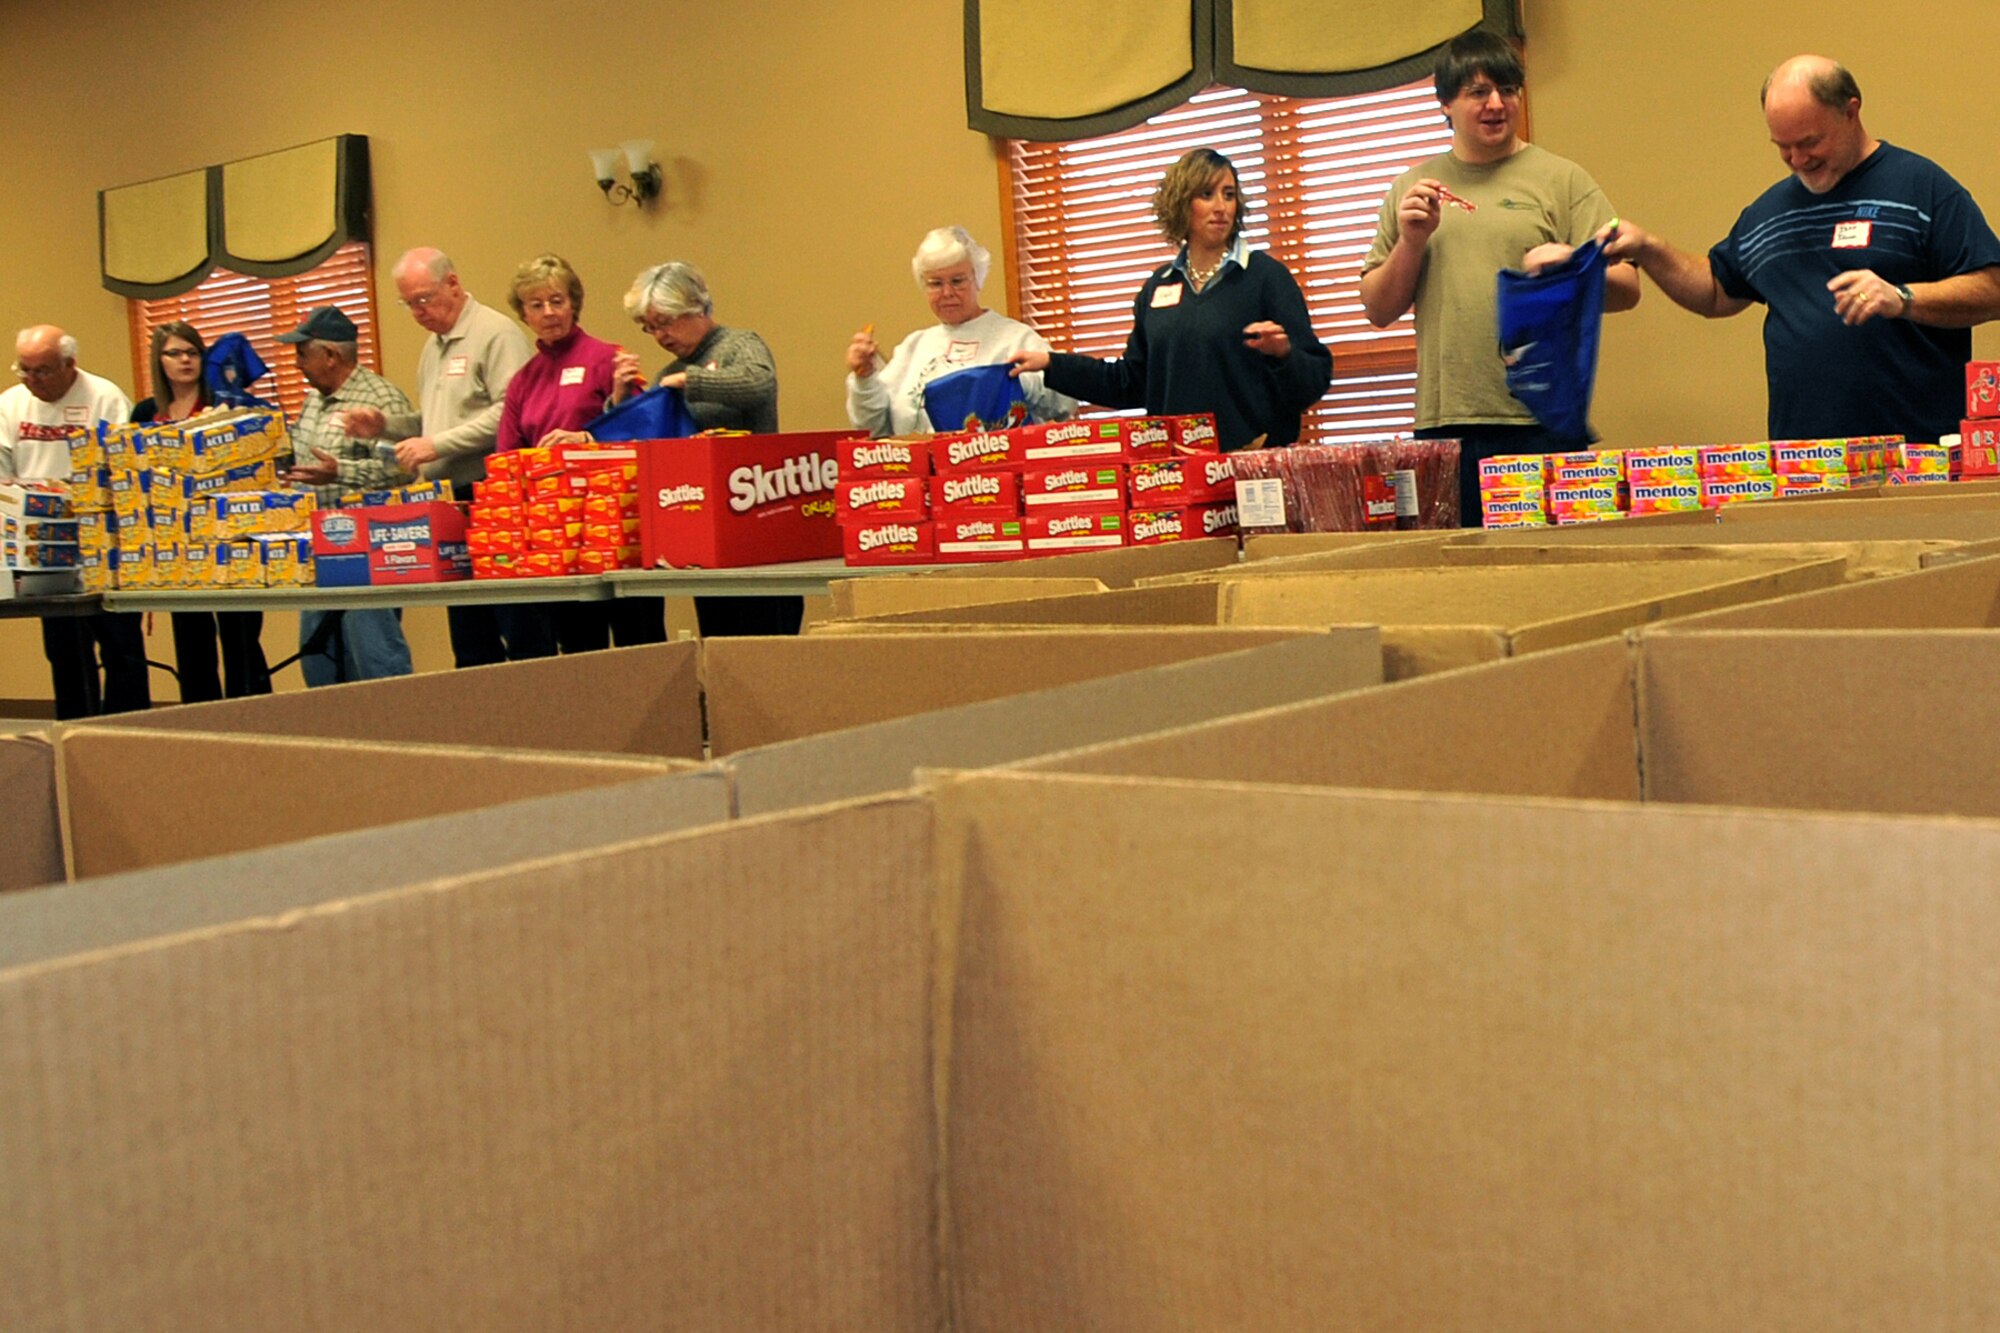 OFFUTT AIR FORCE BASE, Neb. - Volunteers join ranks to fill holiday cheer bags for the Bellevue Chamber of Commerce on Dec. 13. Military members and civilians were on hand to fill snack bags up for local dorm residents at Offutt. U.S. Air Force Photo by Jeff W. Gates (Released)